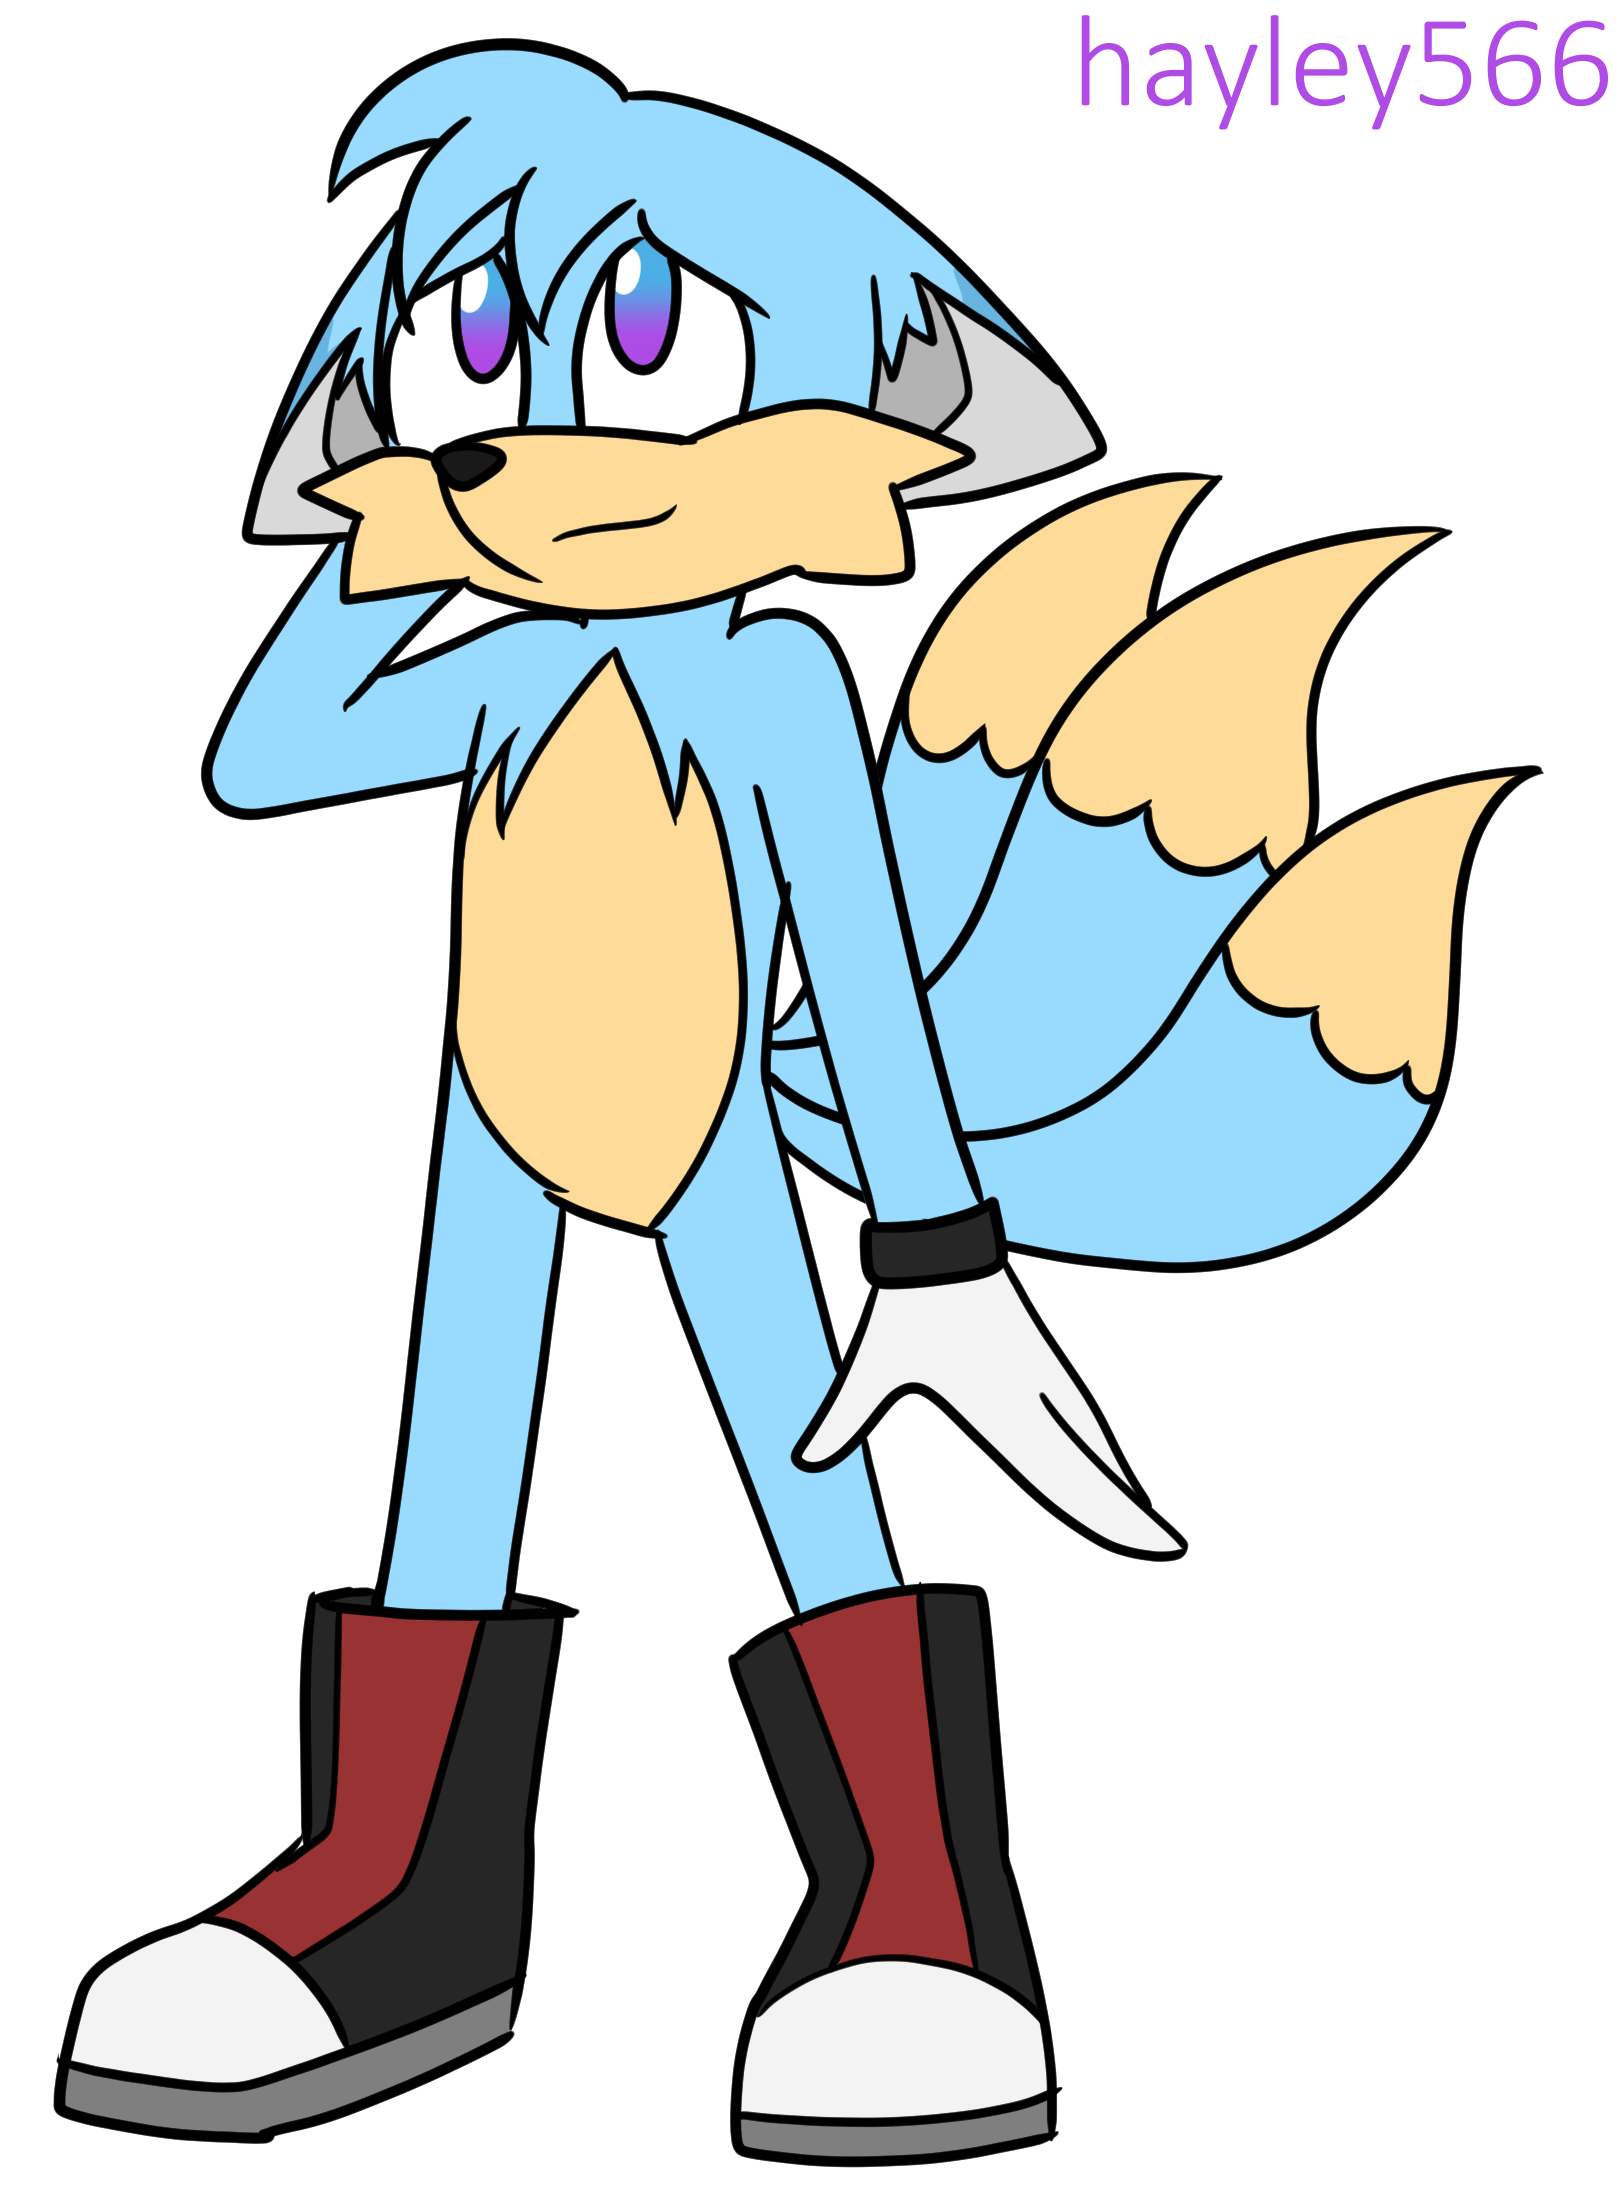 Tails and Kitsuname fusion by hayley566 on DeviantArt